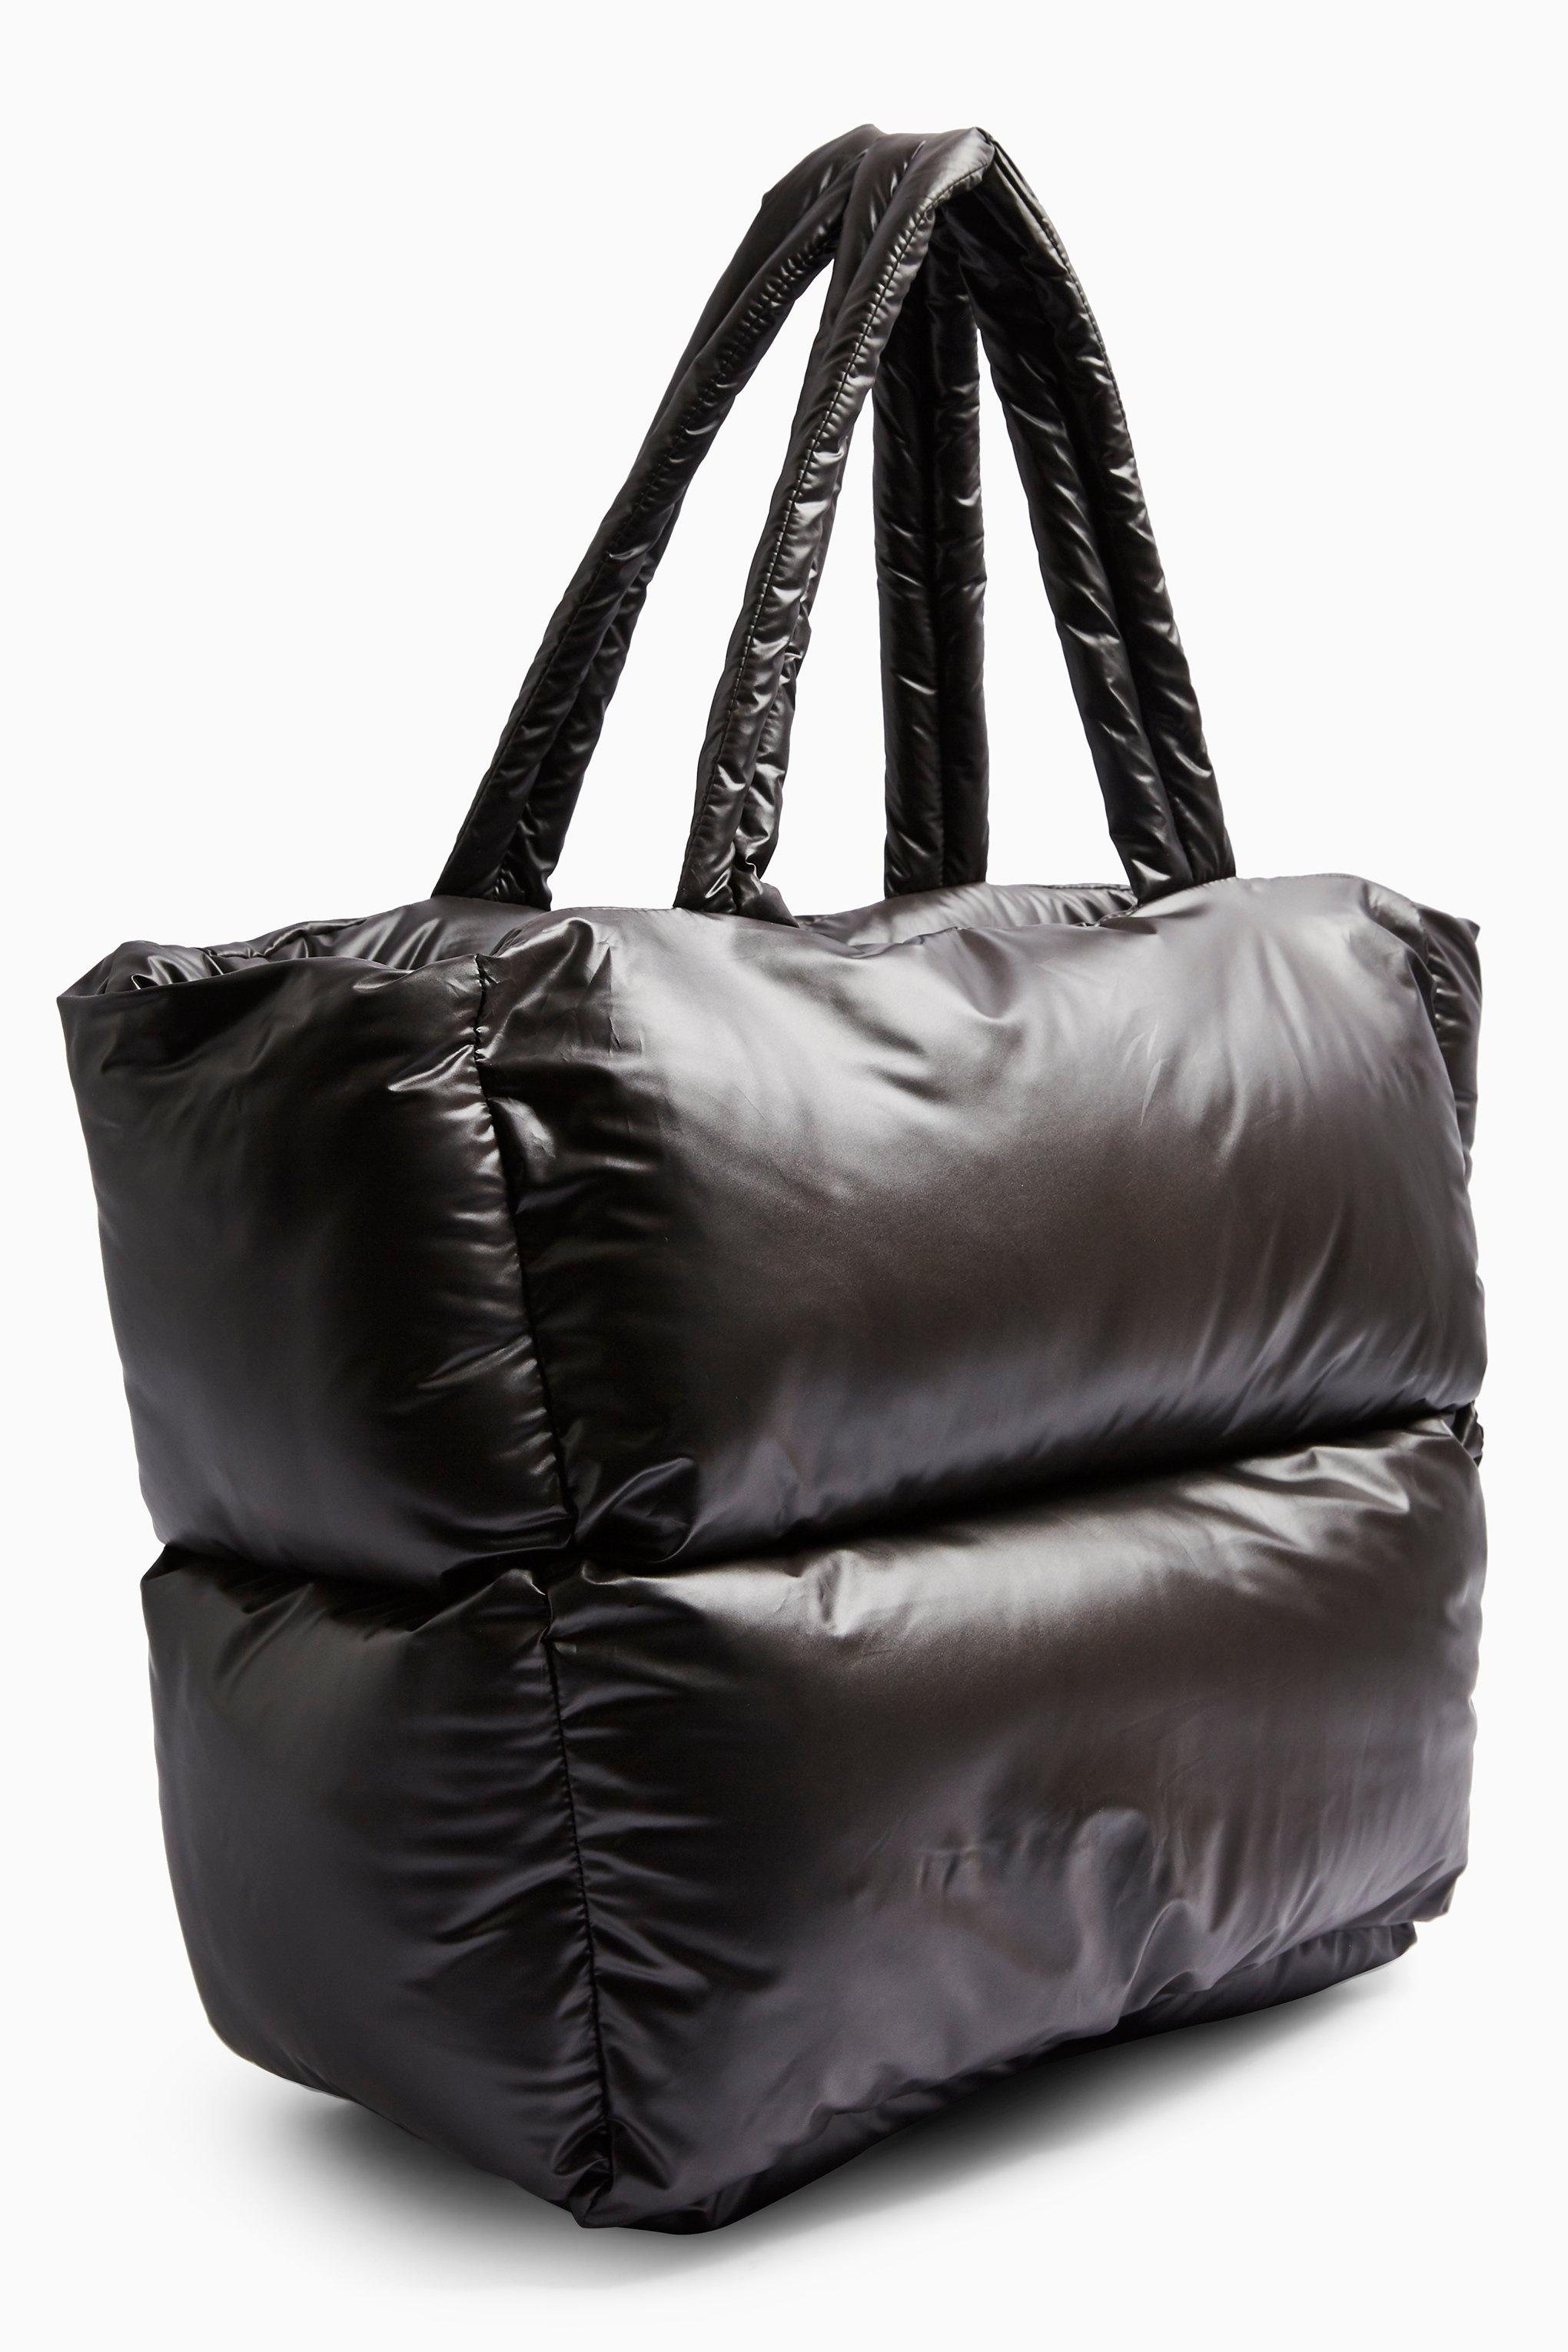 TOPSHOP Synthetic Considered Casa Black Puffer Tote Bag - Lyst